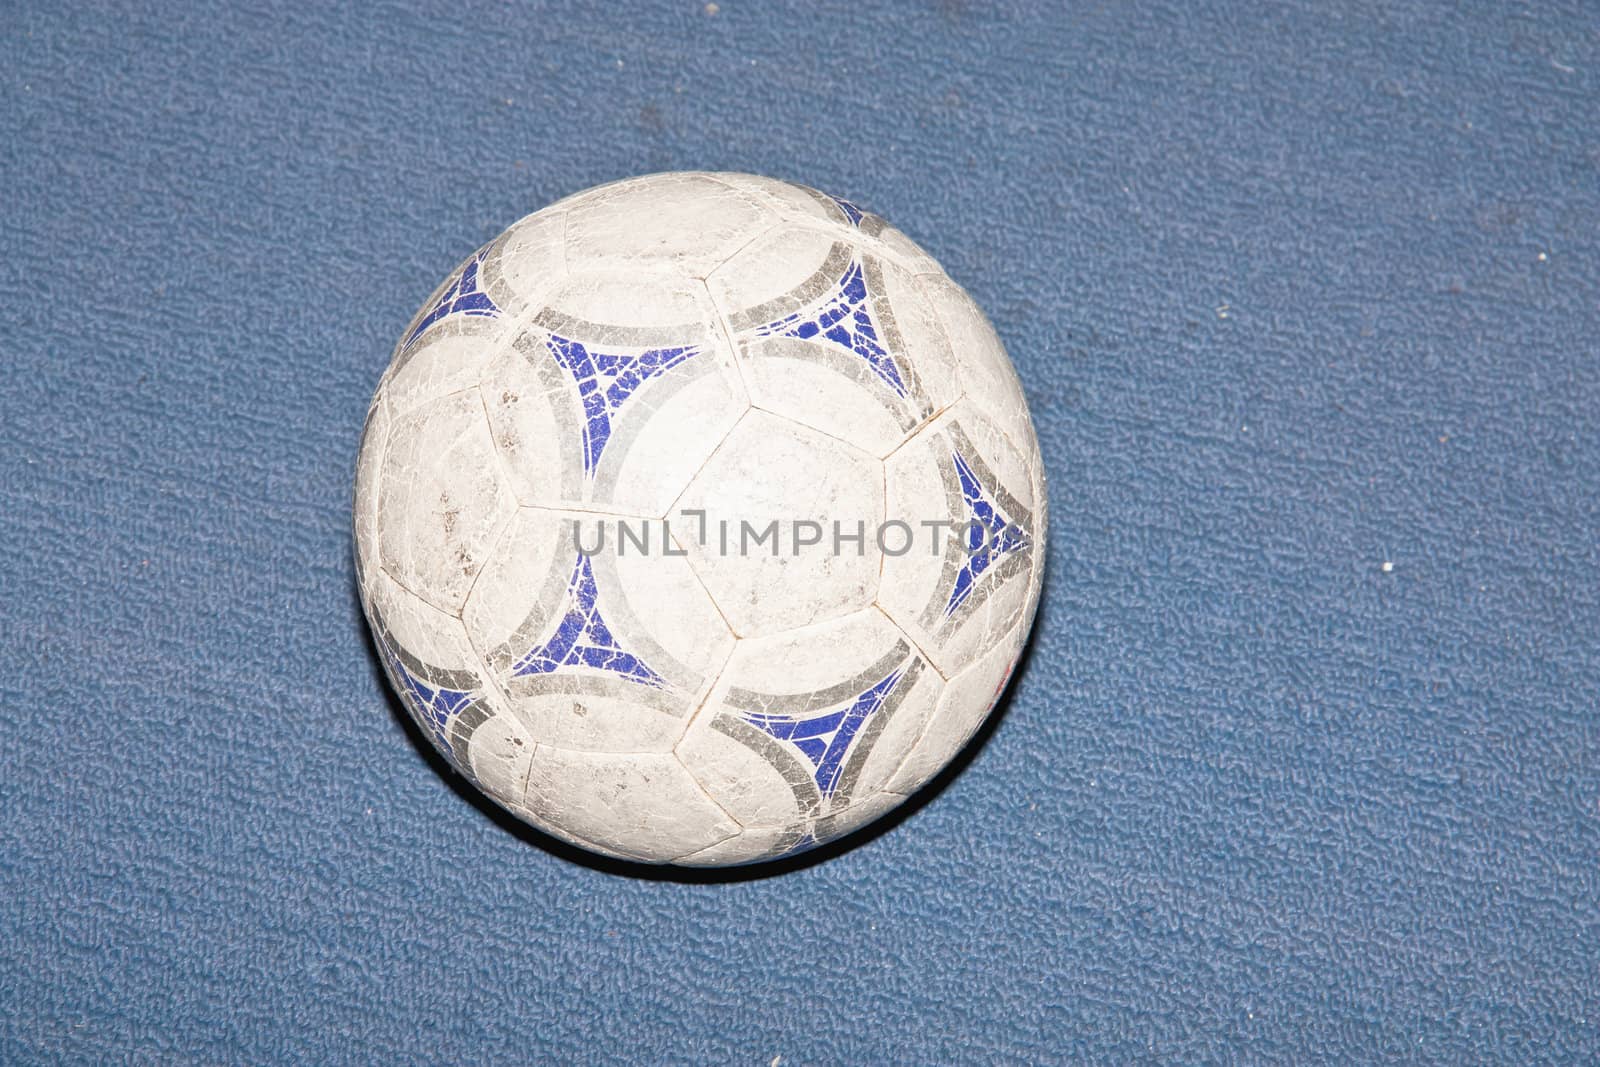 Old soccer ball on background blue grass.